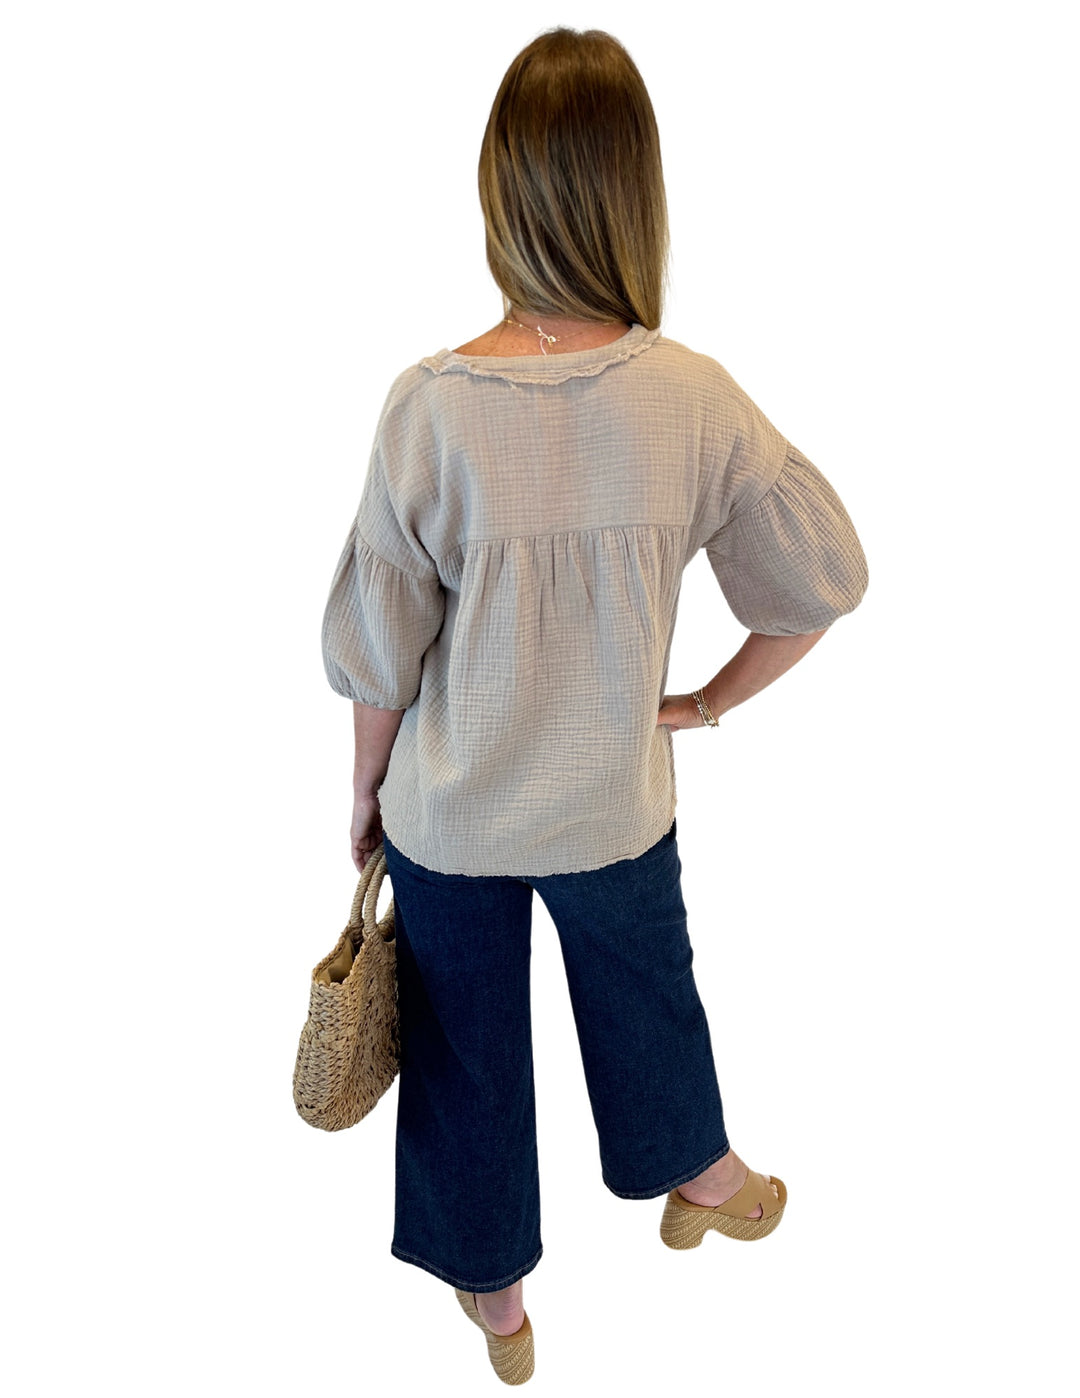 Gladiola Top - Taupe